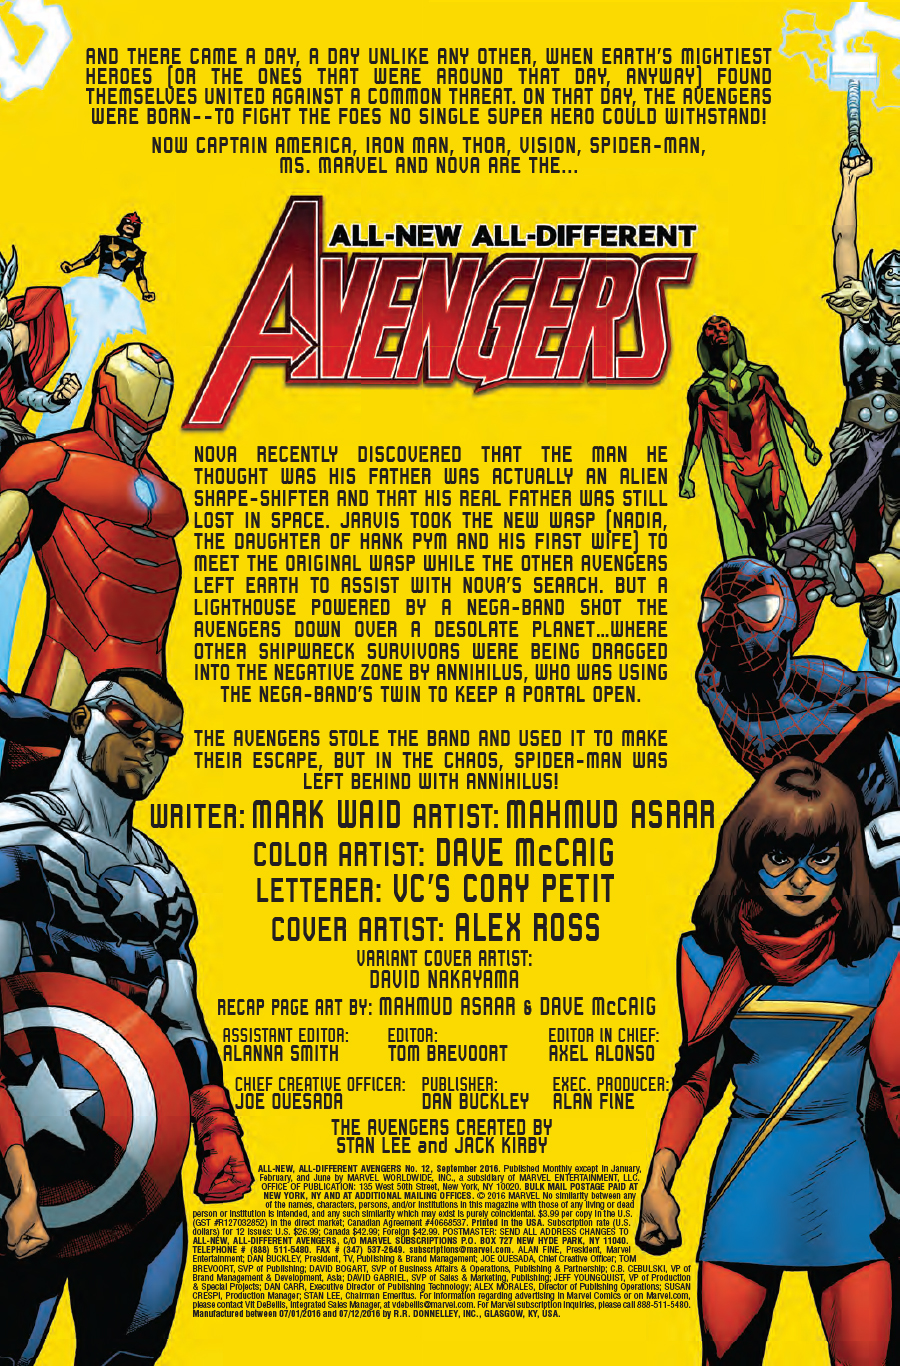 All-New All-Different Avengers #12